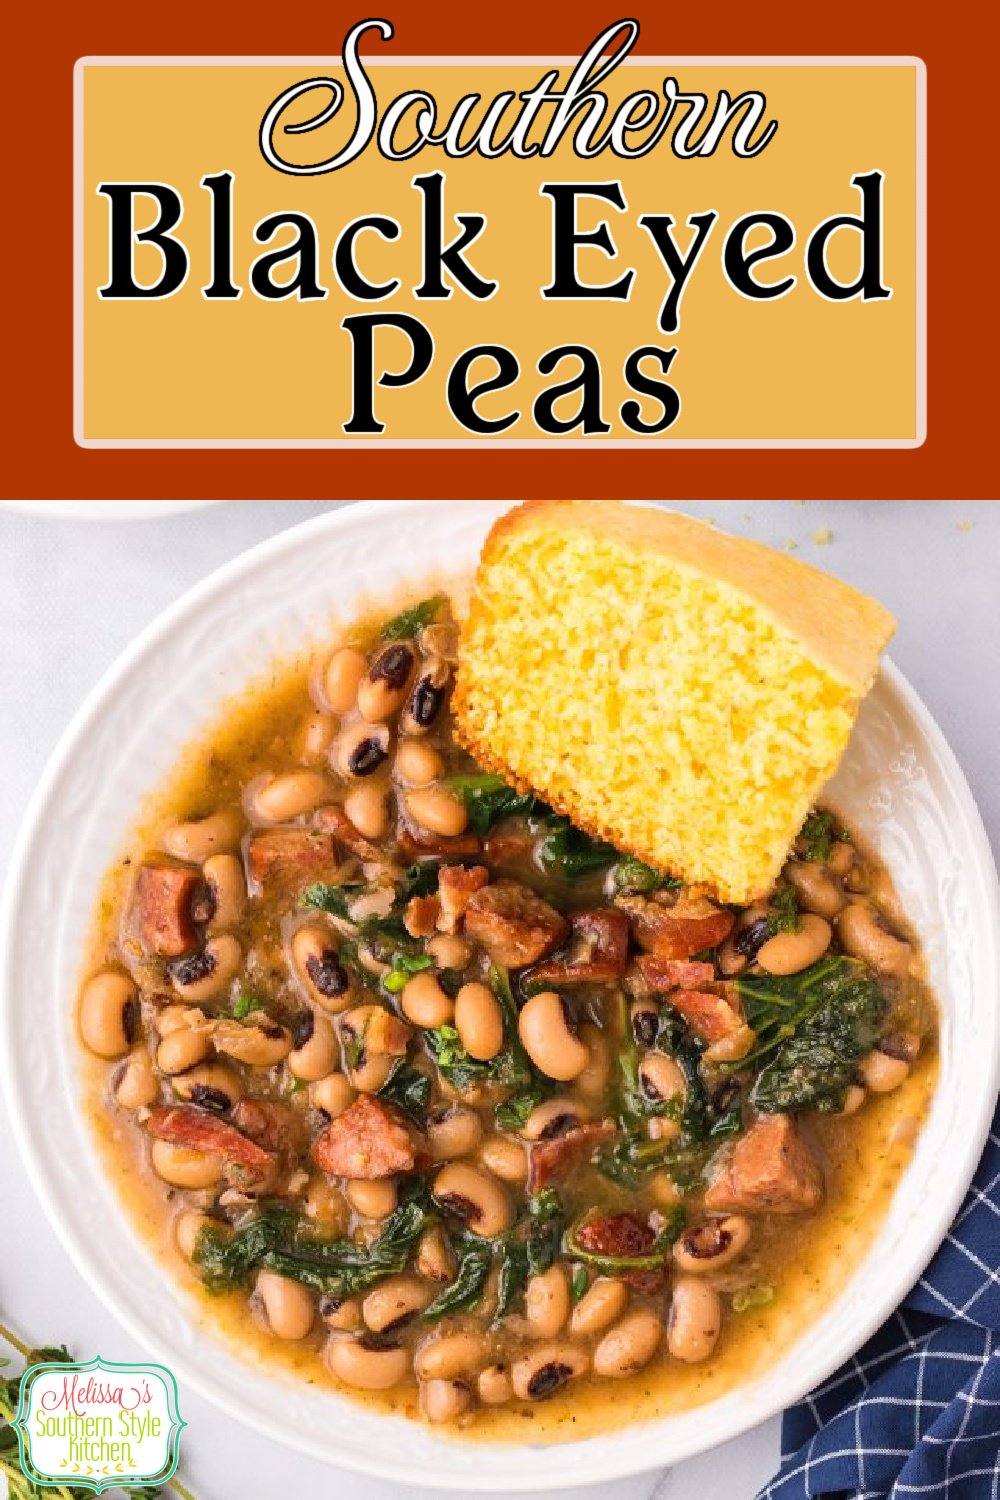 This Southern Black Eyed Peas recipe is a flavor packed dish that the family will love year-round. #blackeyedpeas #newyearsrecipes #southernpeas #southernblackeyedpeas #recipesforblackeyedpeas #easyblackeyedpeasrecipe via @melissasssk